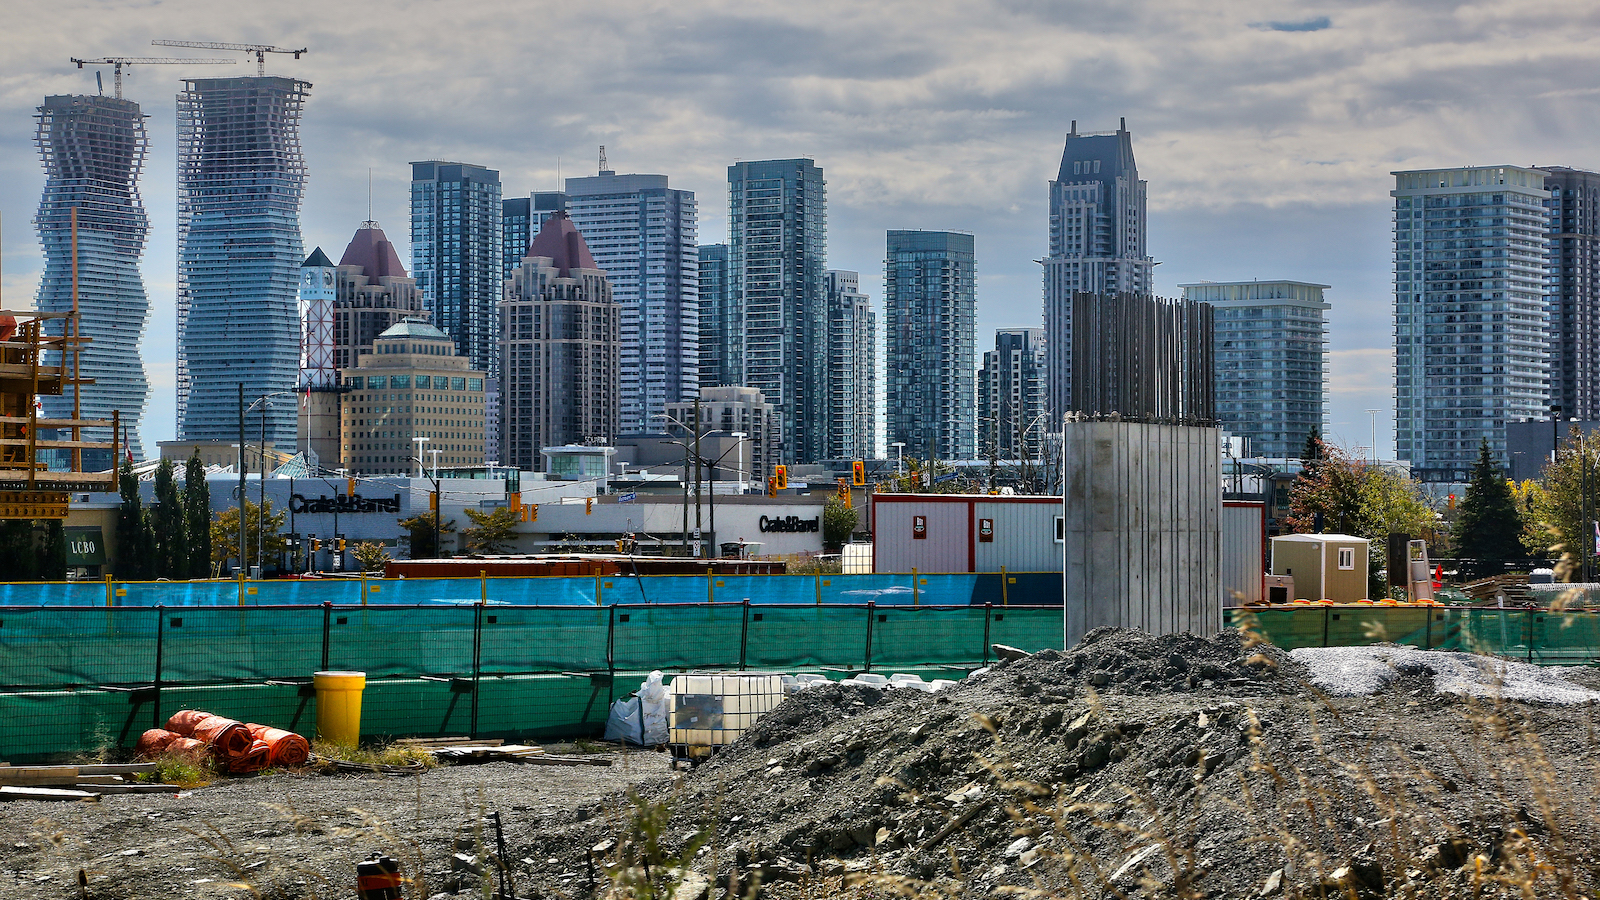 Skyline of glass, newly-constructed buildings in downtown Mississauga, Ontario with a construction site in the foreground.